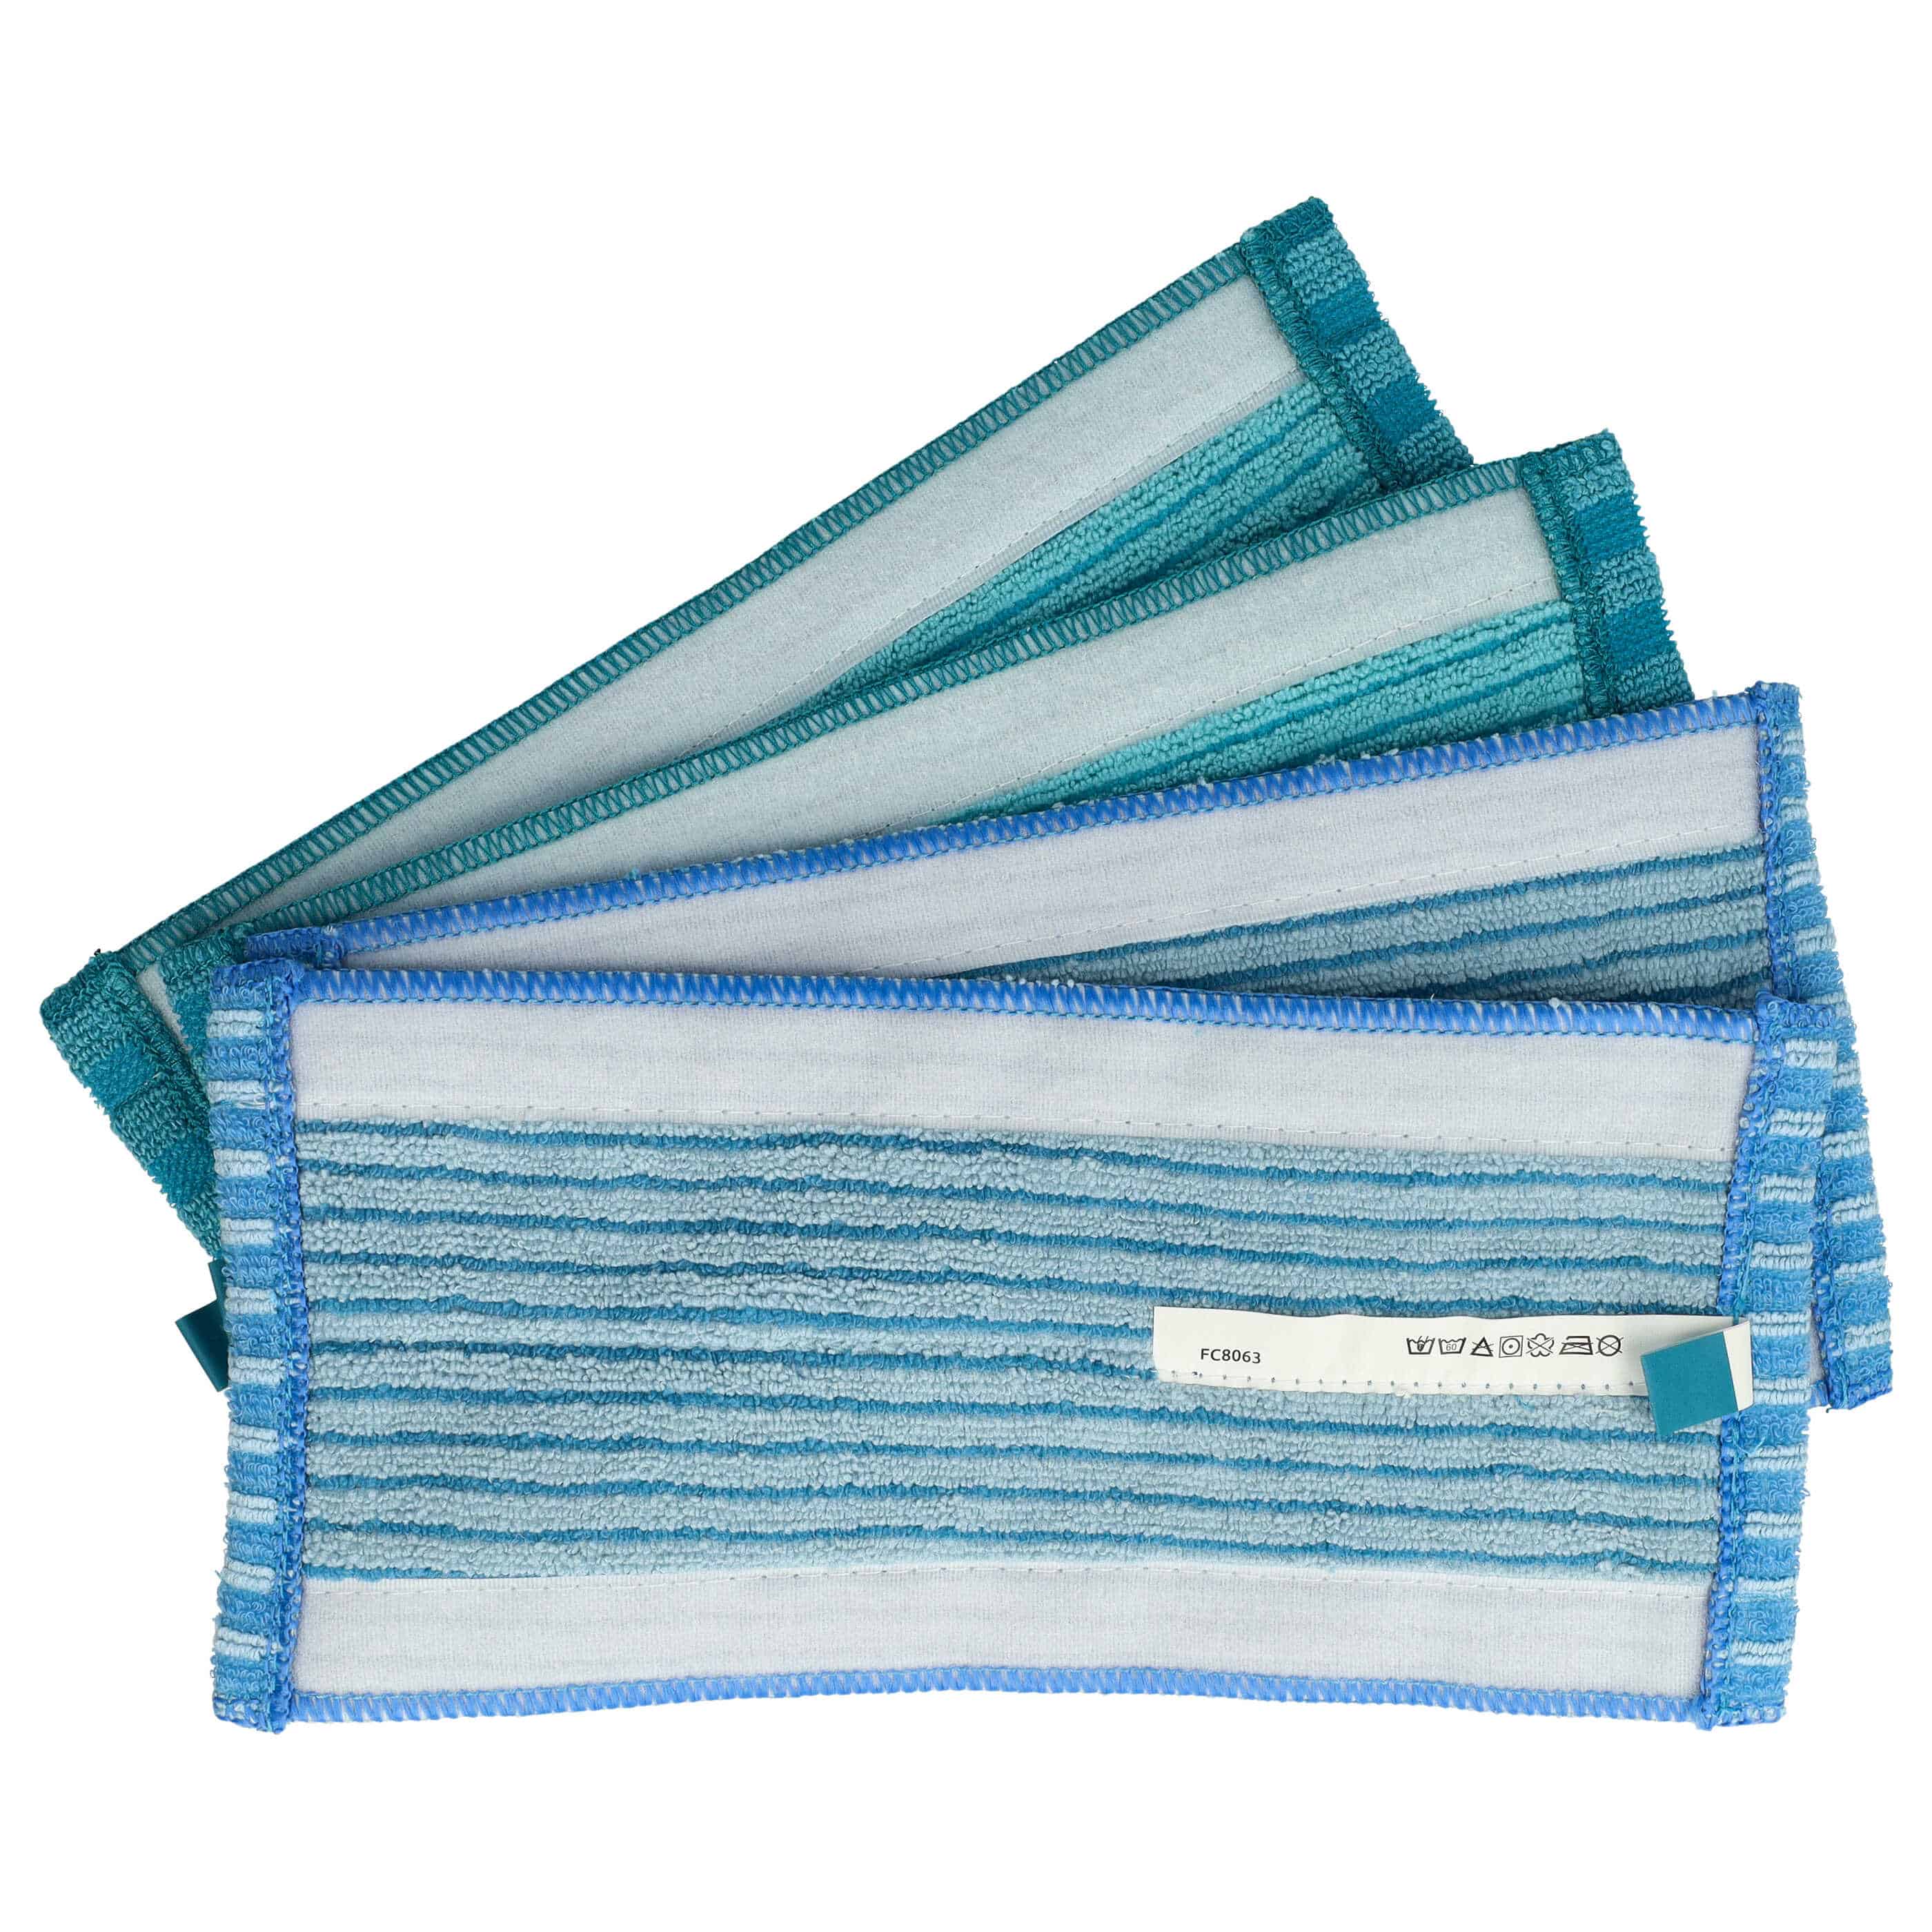  Cleaning Cloth Set (4 Part) replaces Philips XV1700/01, 432200494312 for Cordless Vacuum Cleaner - microfibre